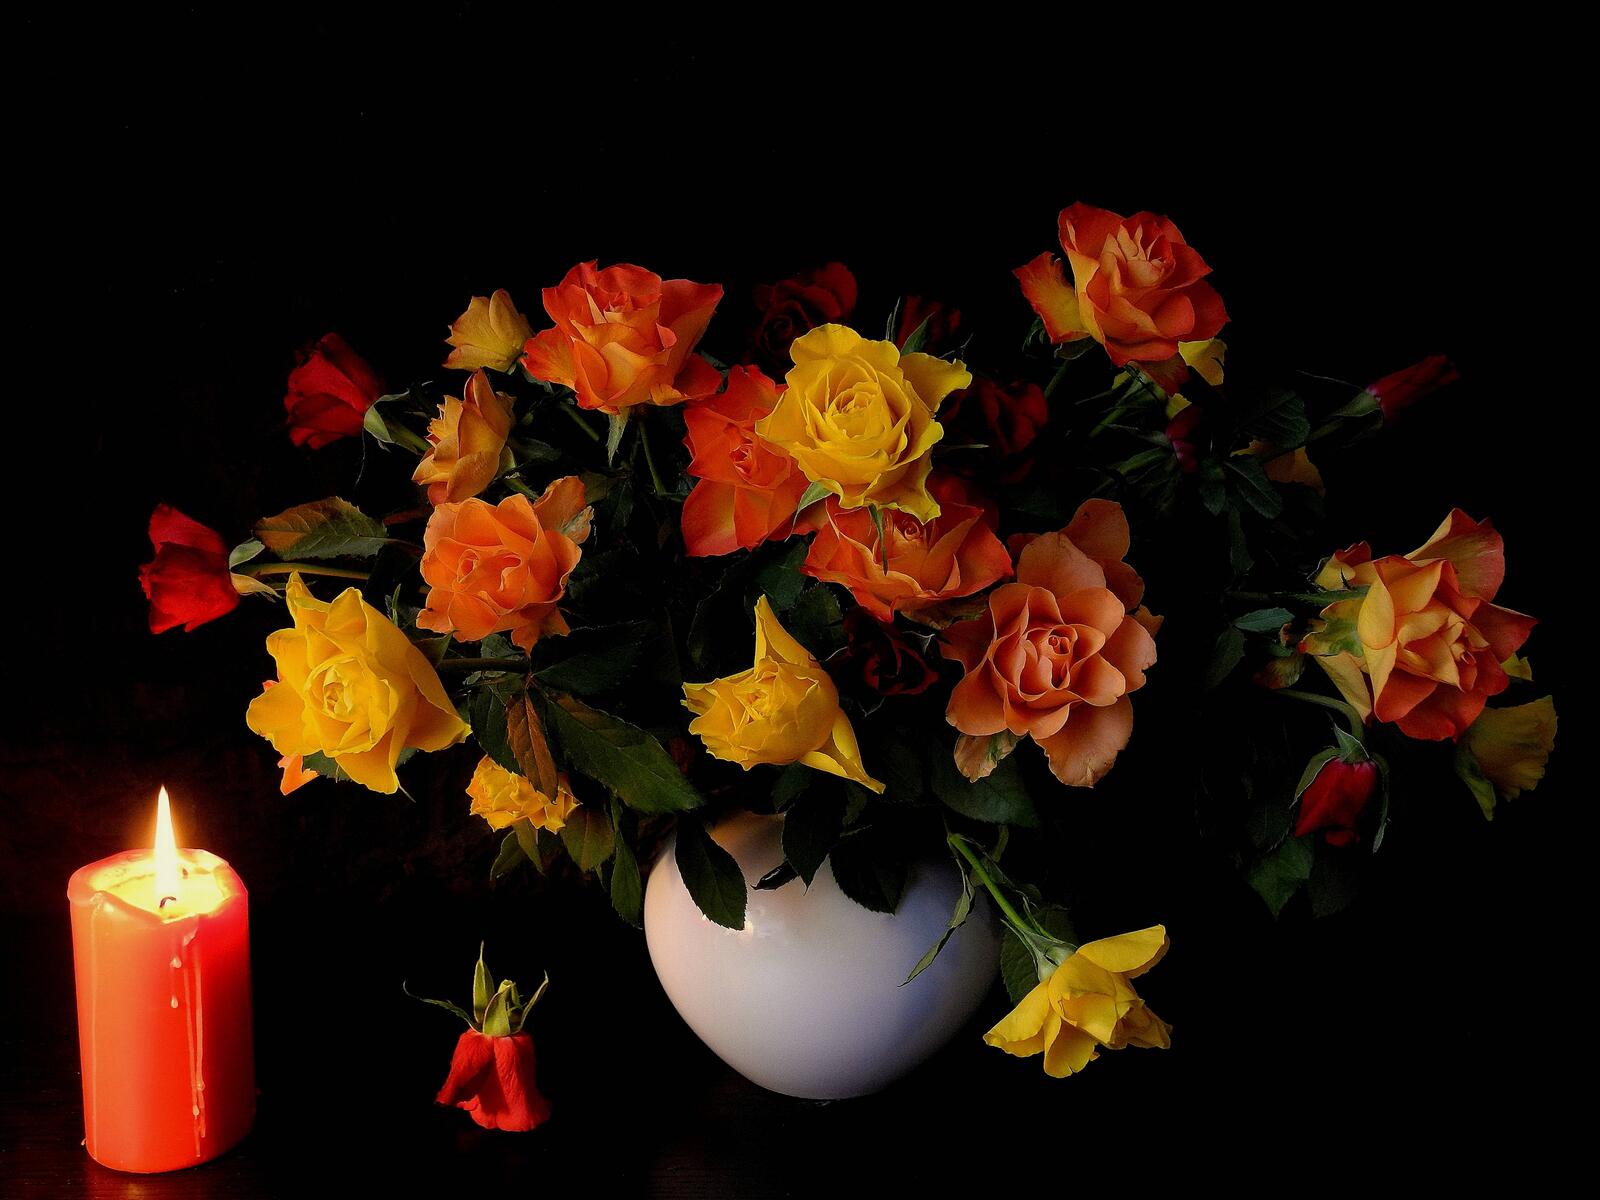 Wallpapers candle still life roses on the desktop